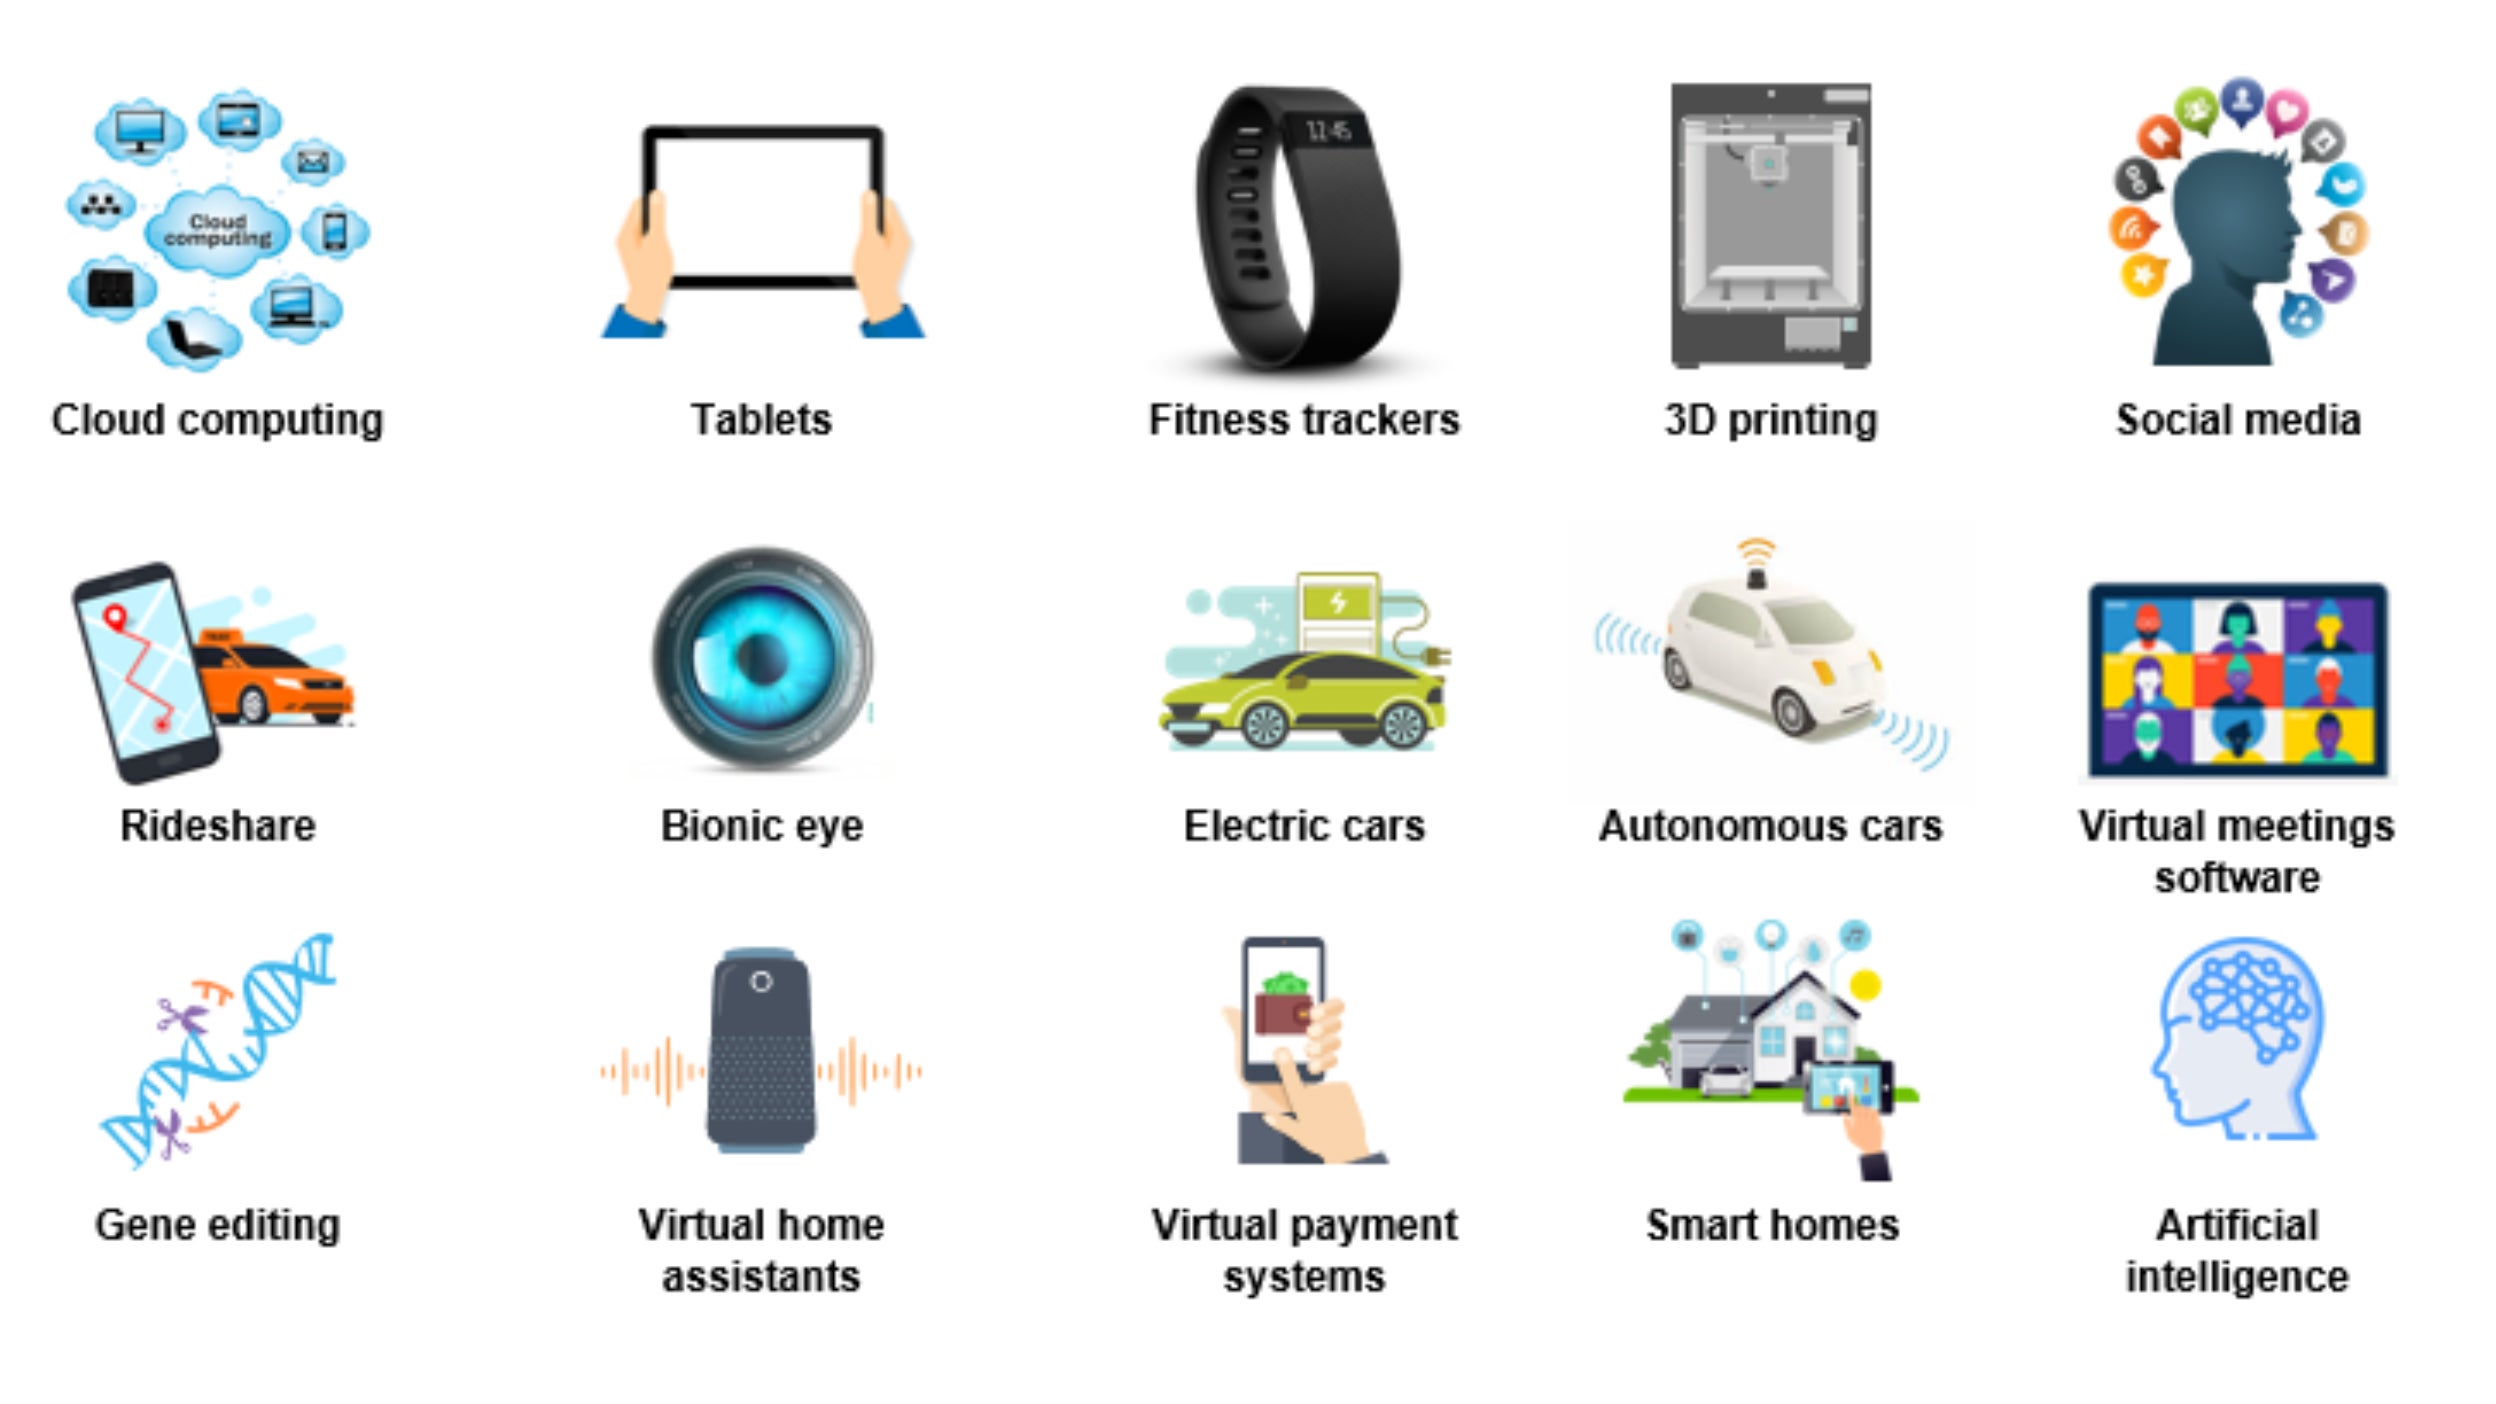 Innovations since 2008 election include cloud computing, tablets, fitness trackers, 3D printing, social media, rideshare, bionic eye, electric cars and autonomous cars, and artificial intelligence.